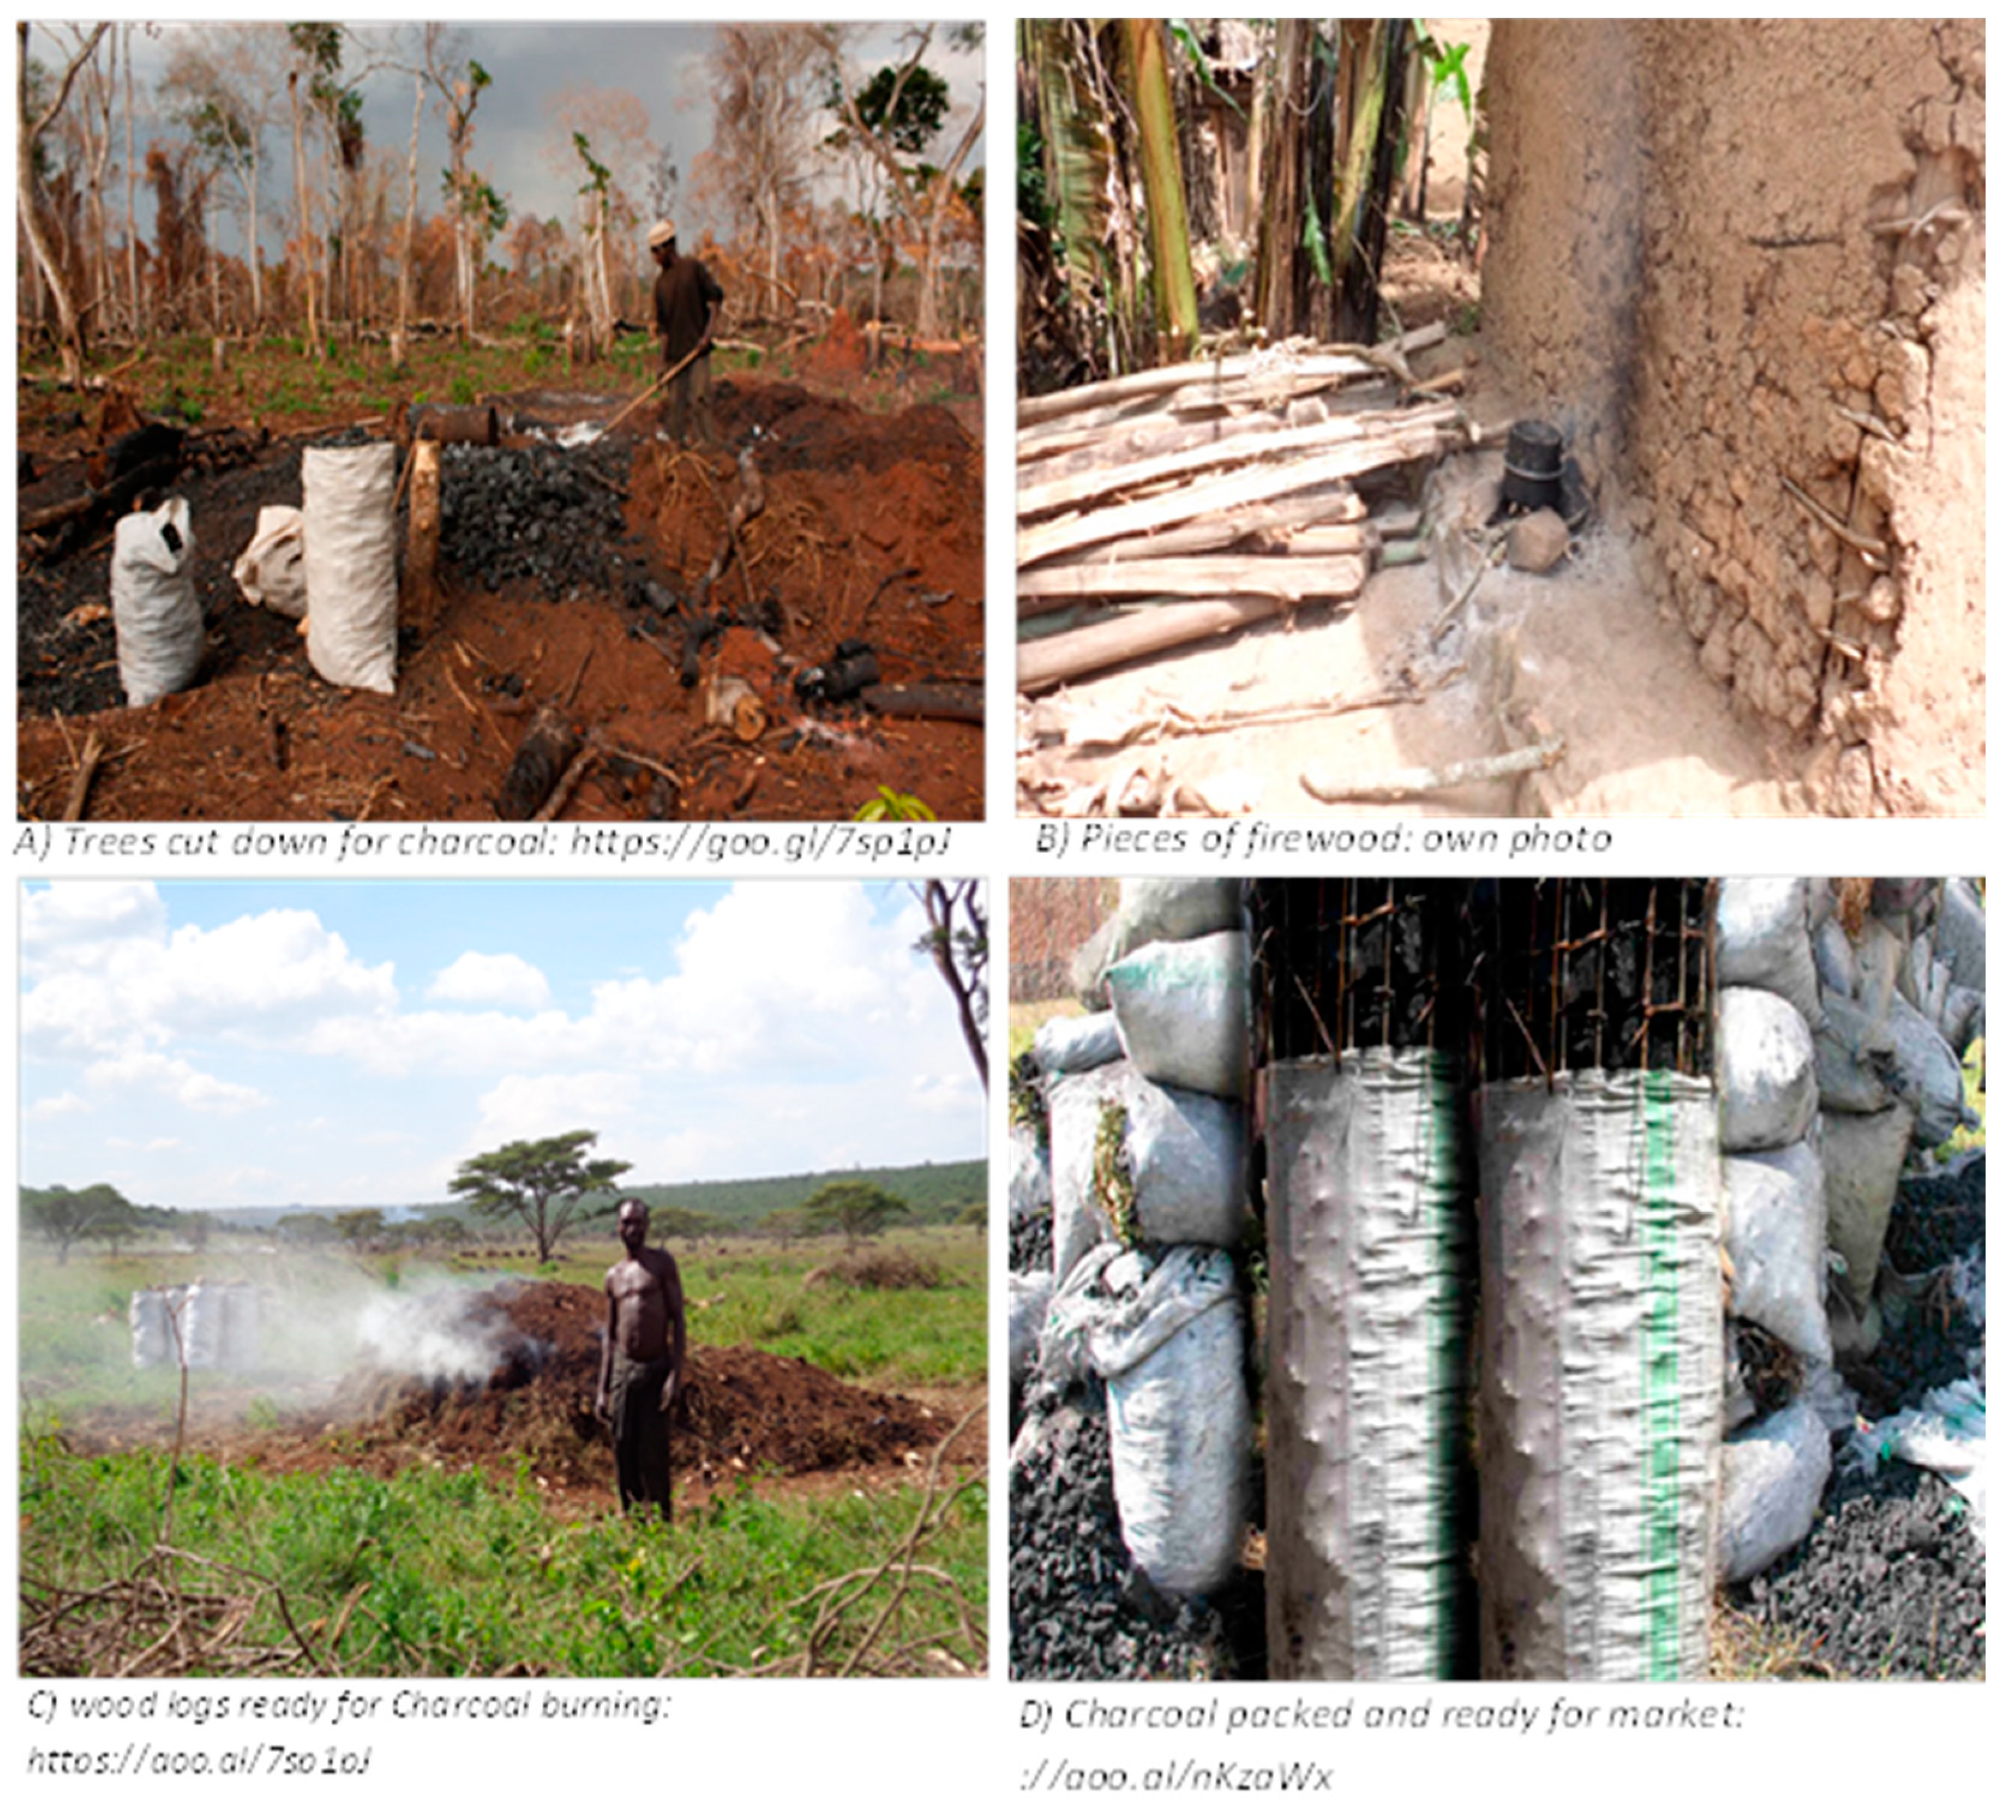 Four steps of charcoal production in Uganda. The first is deforestation.